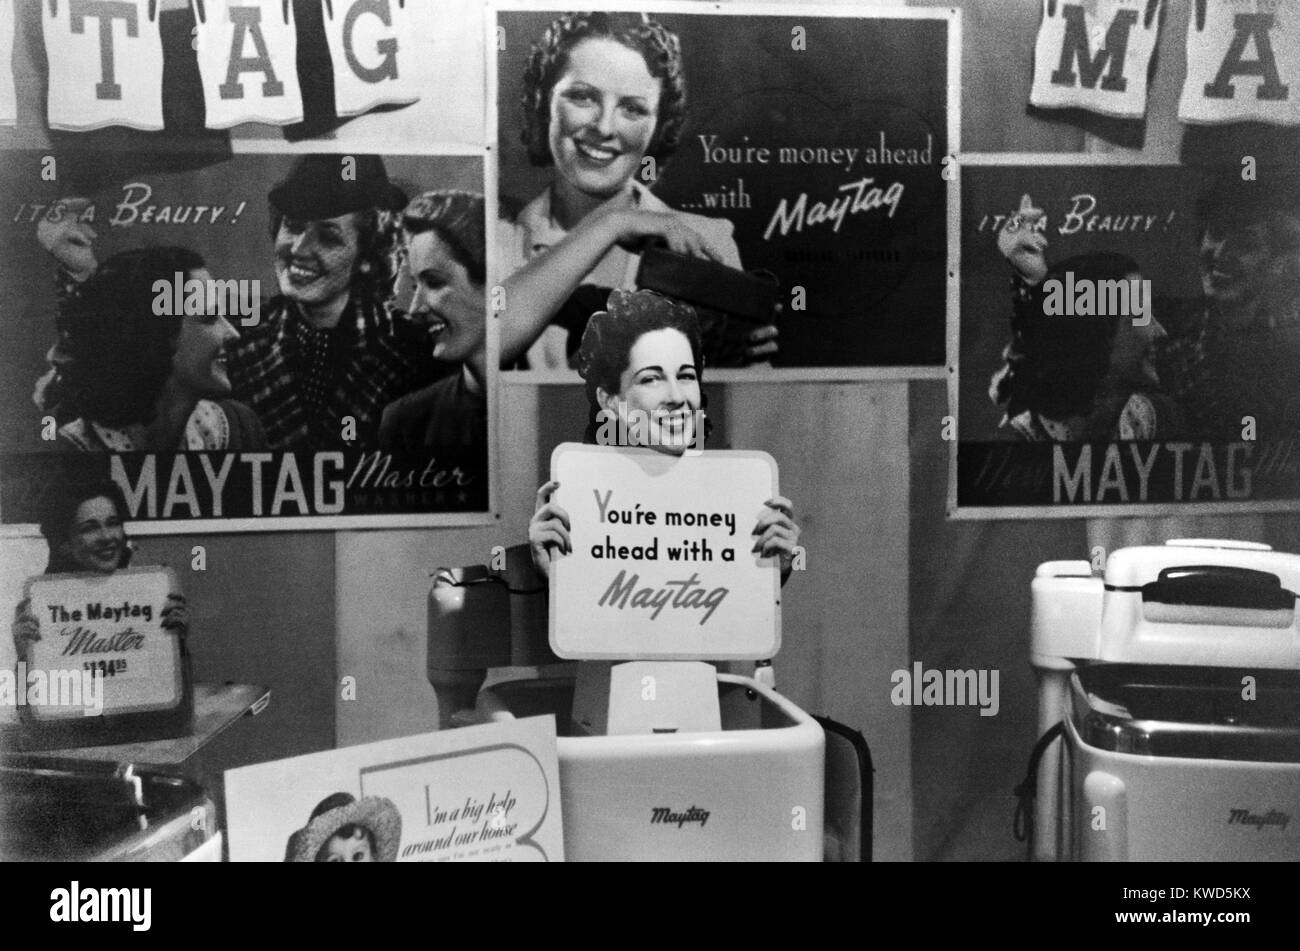 Maytag clothes washer exhibit at the Champlain Valley Exposition, Vermont in Aug. 1941. (BSLOC 2014 13 221) Stock Photo